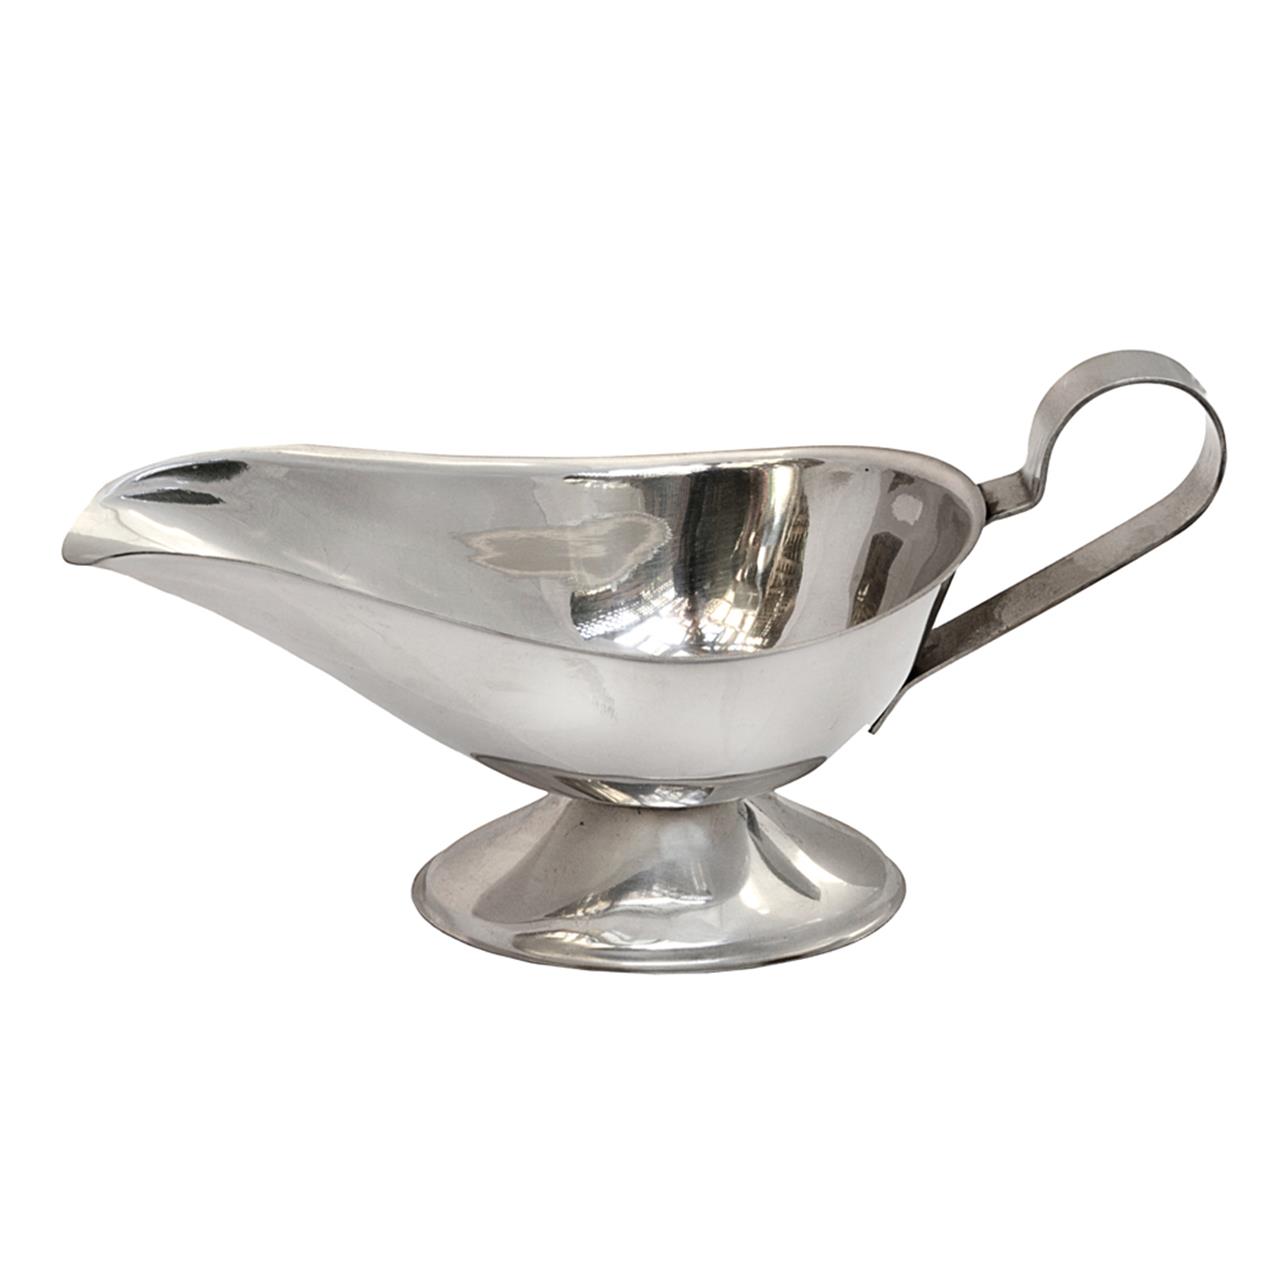 Royal Industries Gravy Boat Stainless Steel Silver 16 Oz 